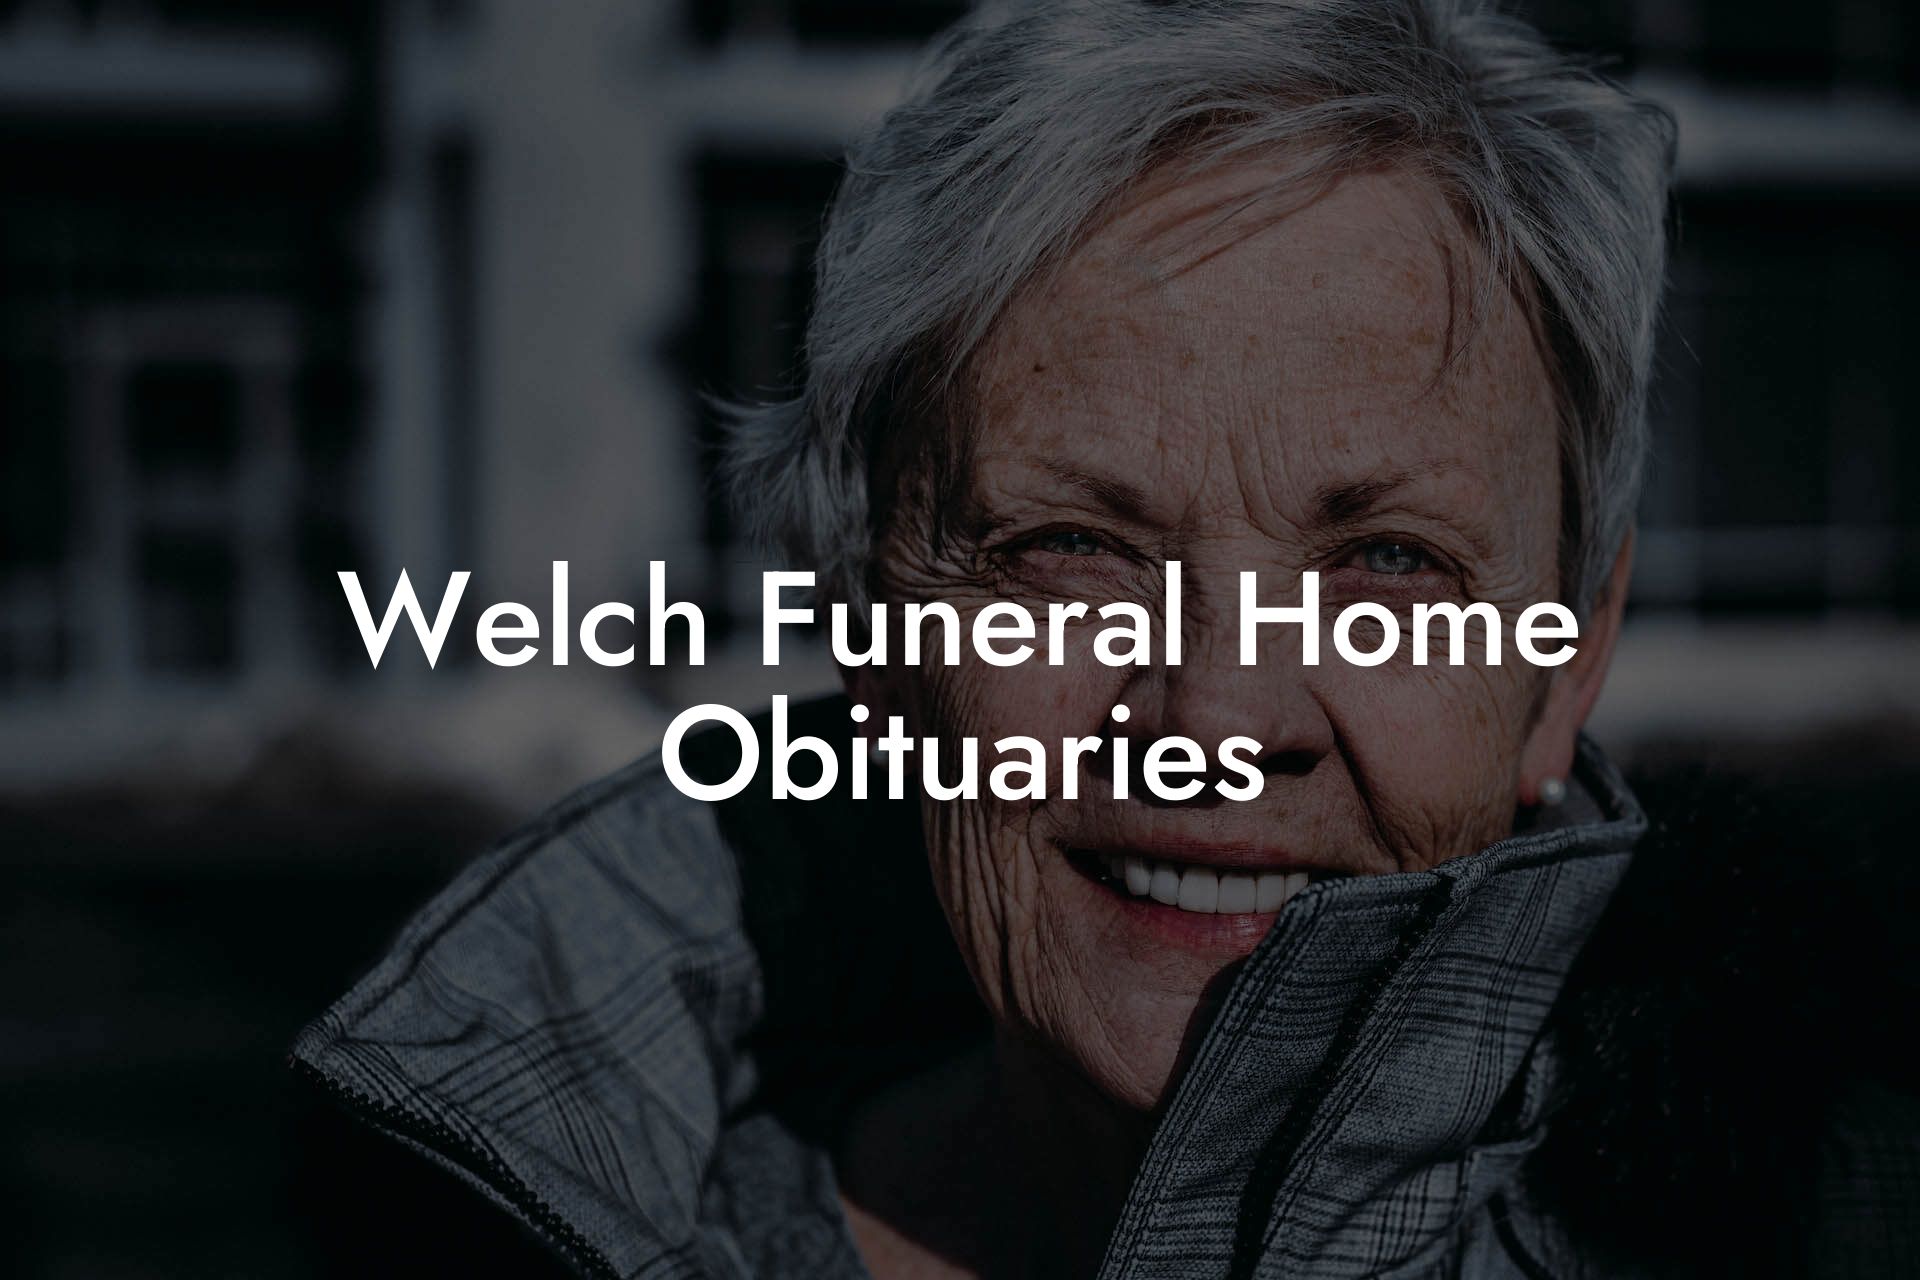 Welch Funeral Home Obituaries